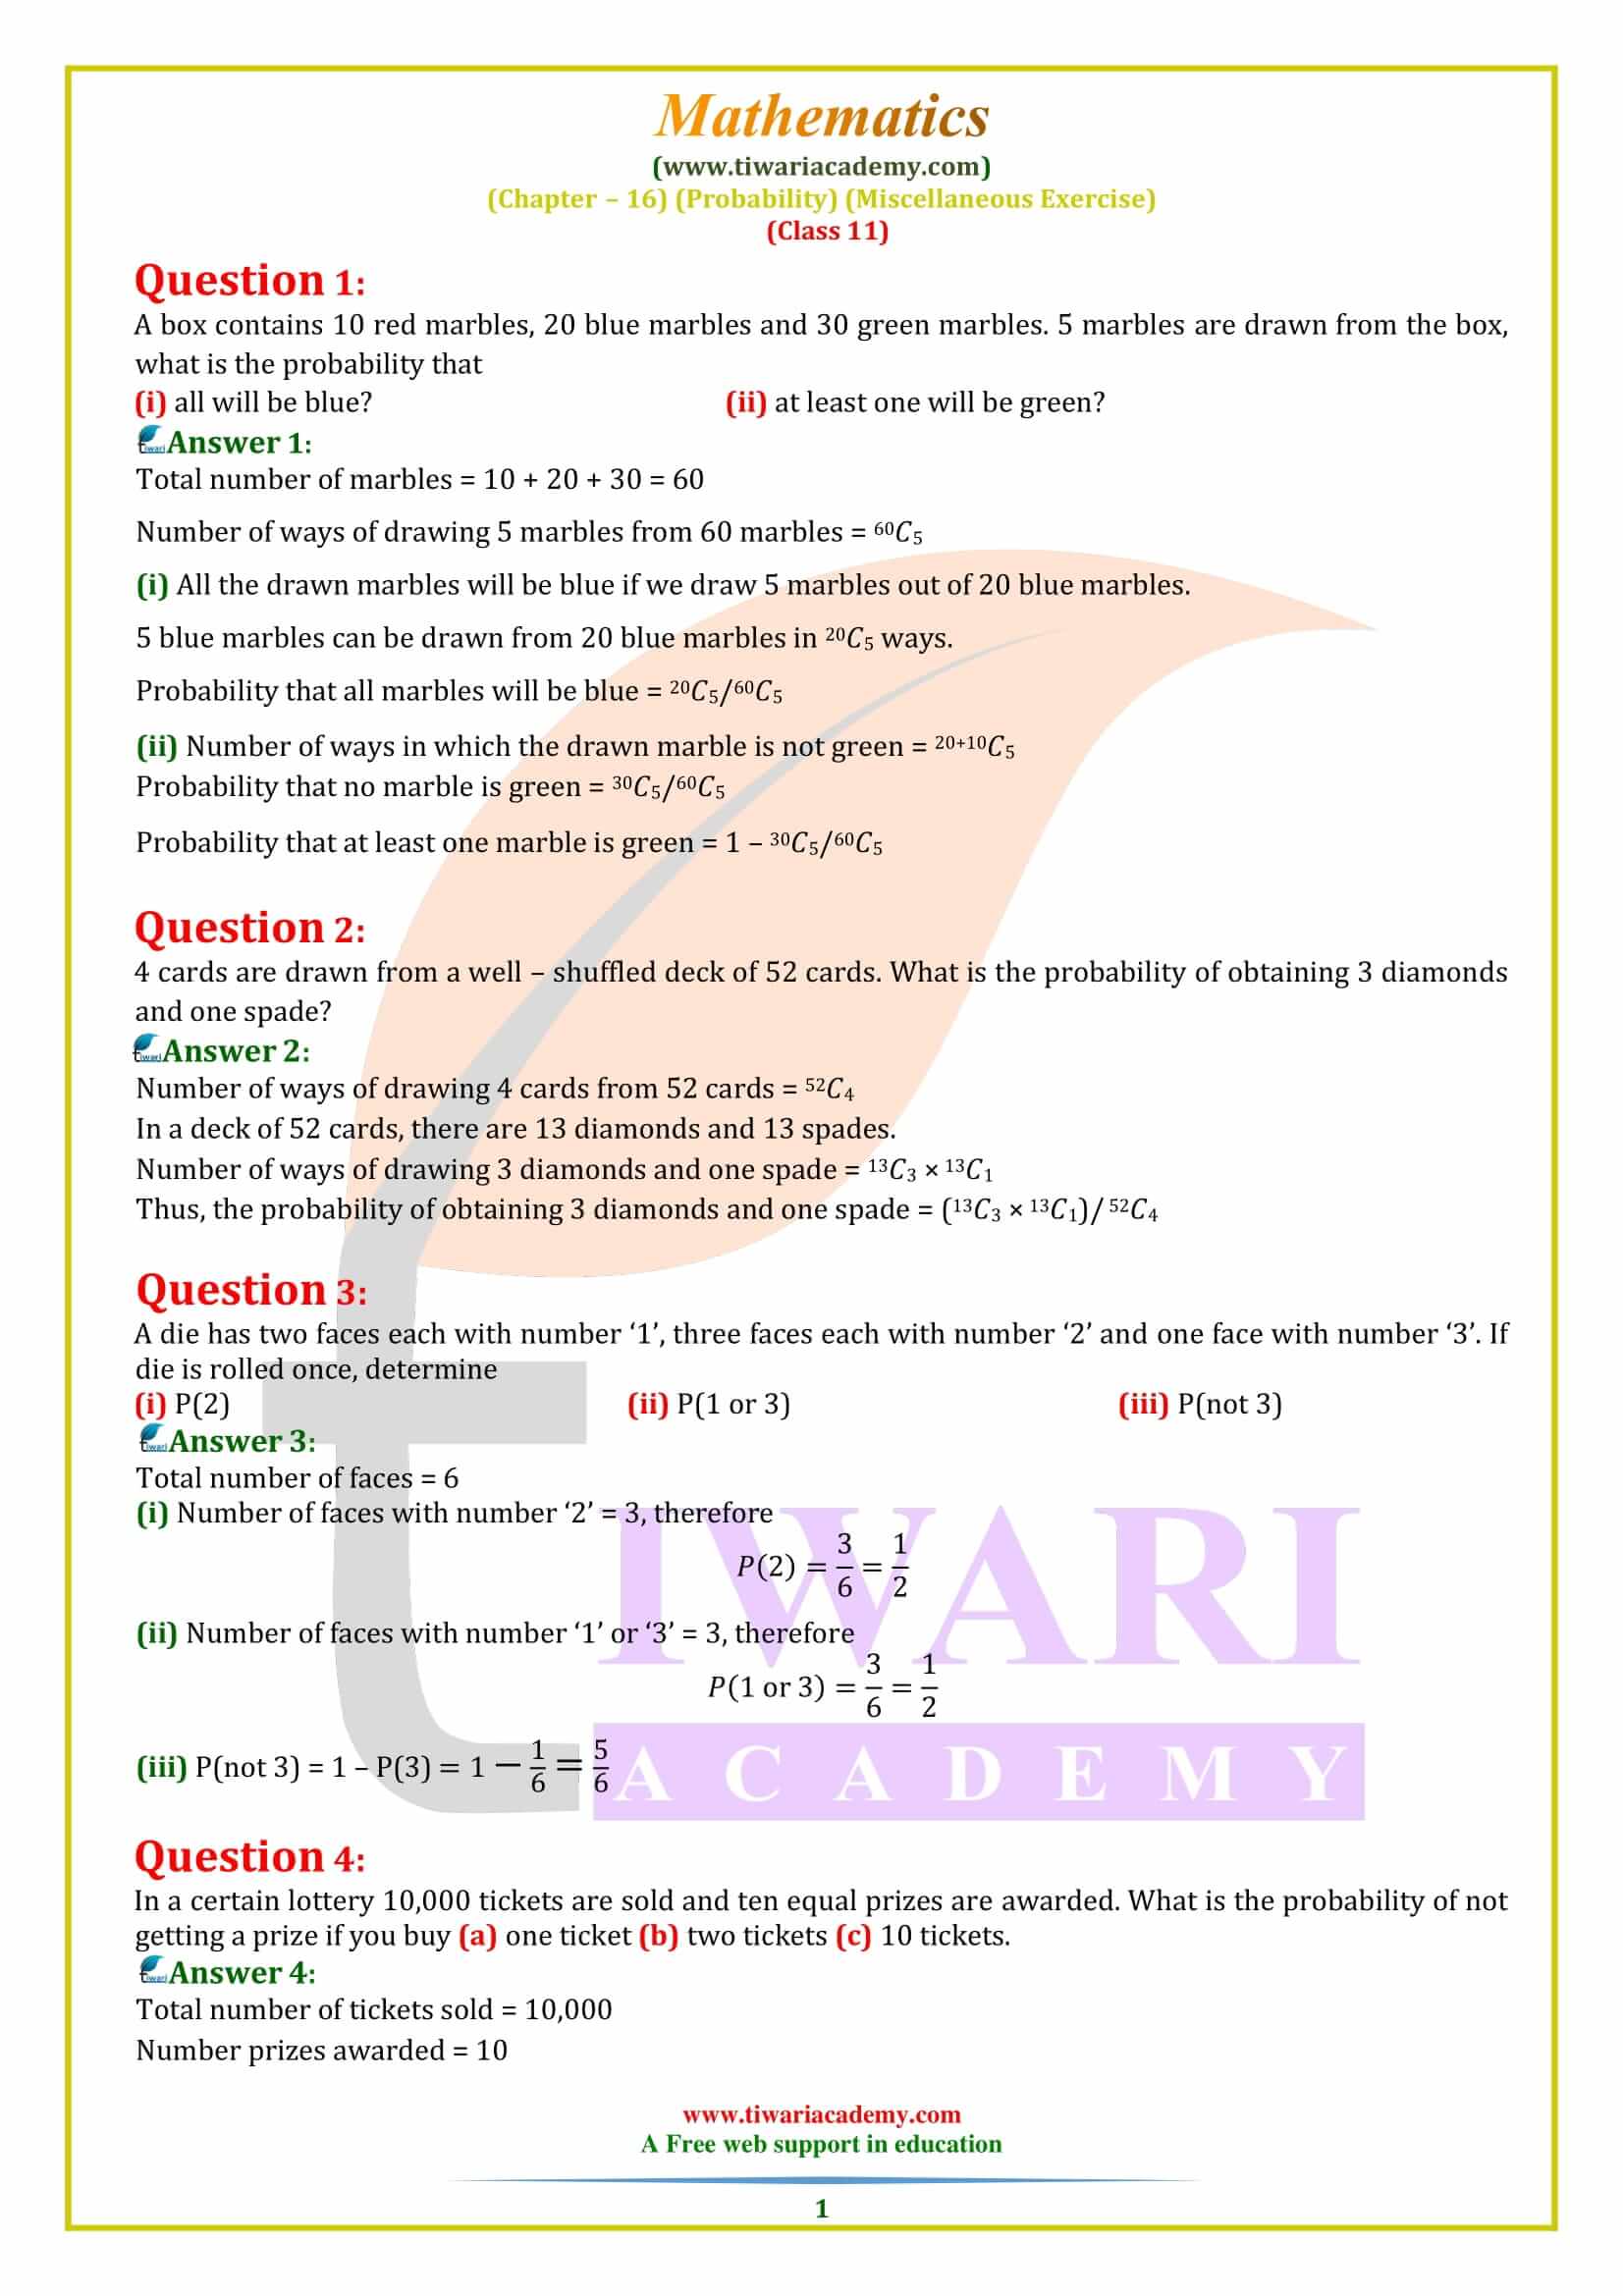 Class 11 Maths Chapter 16 Miscellaneous Exercise Probability